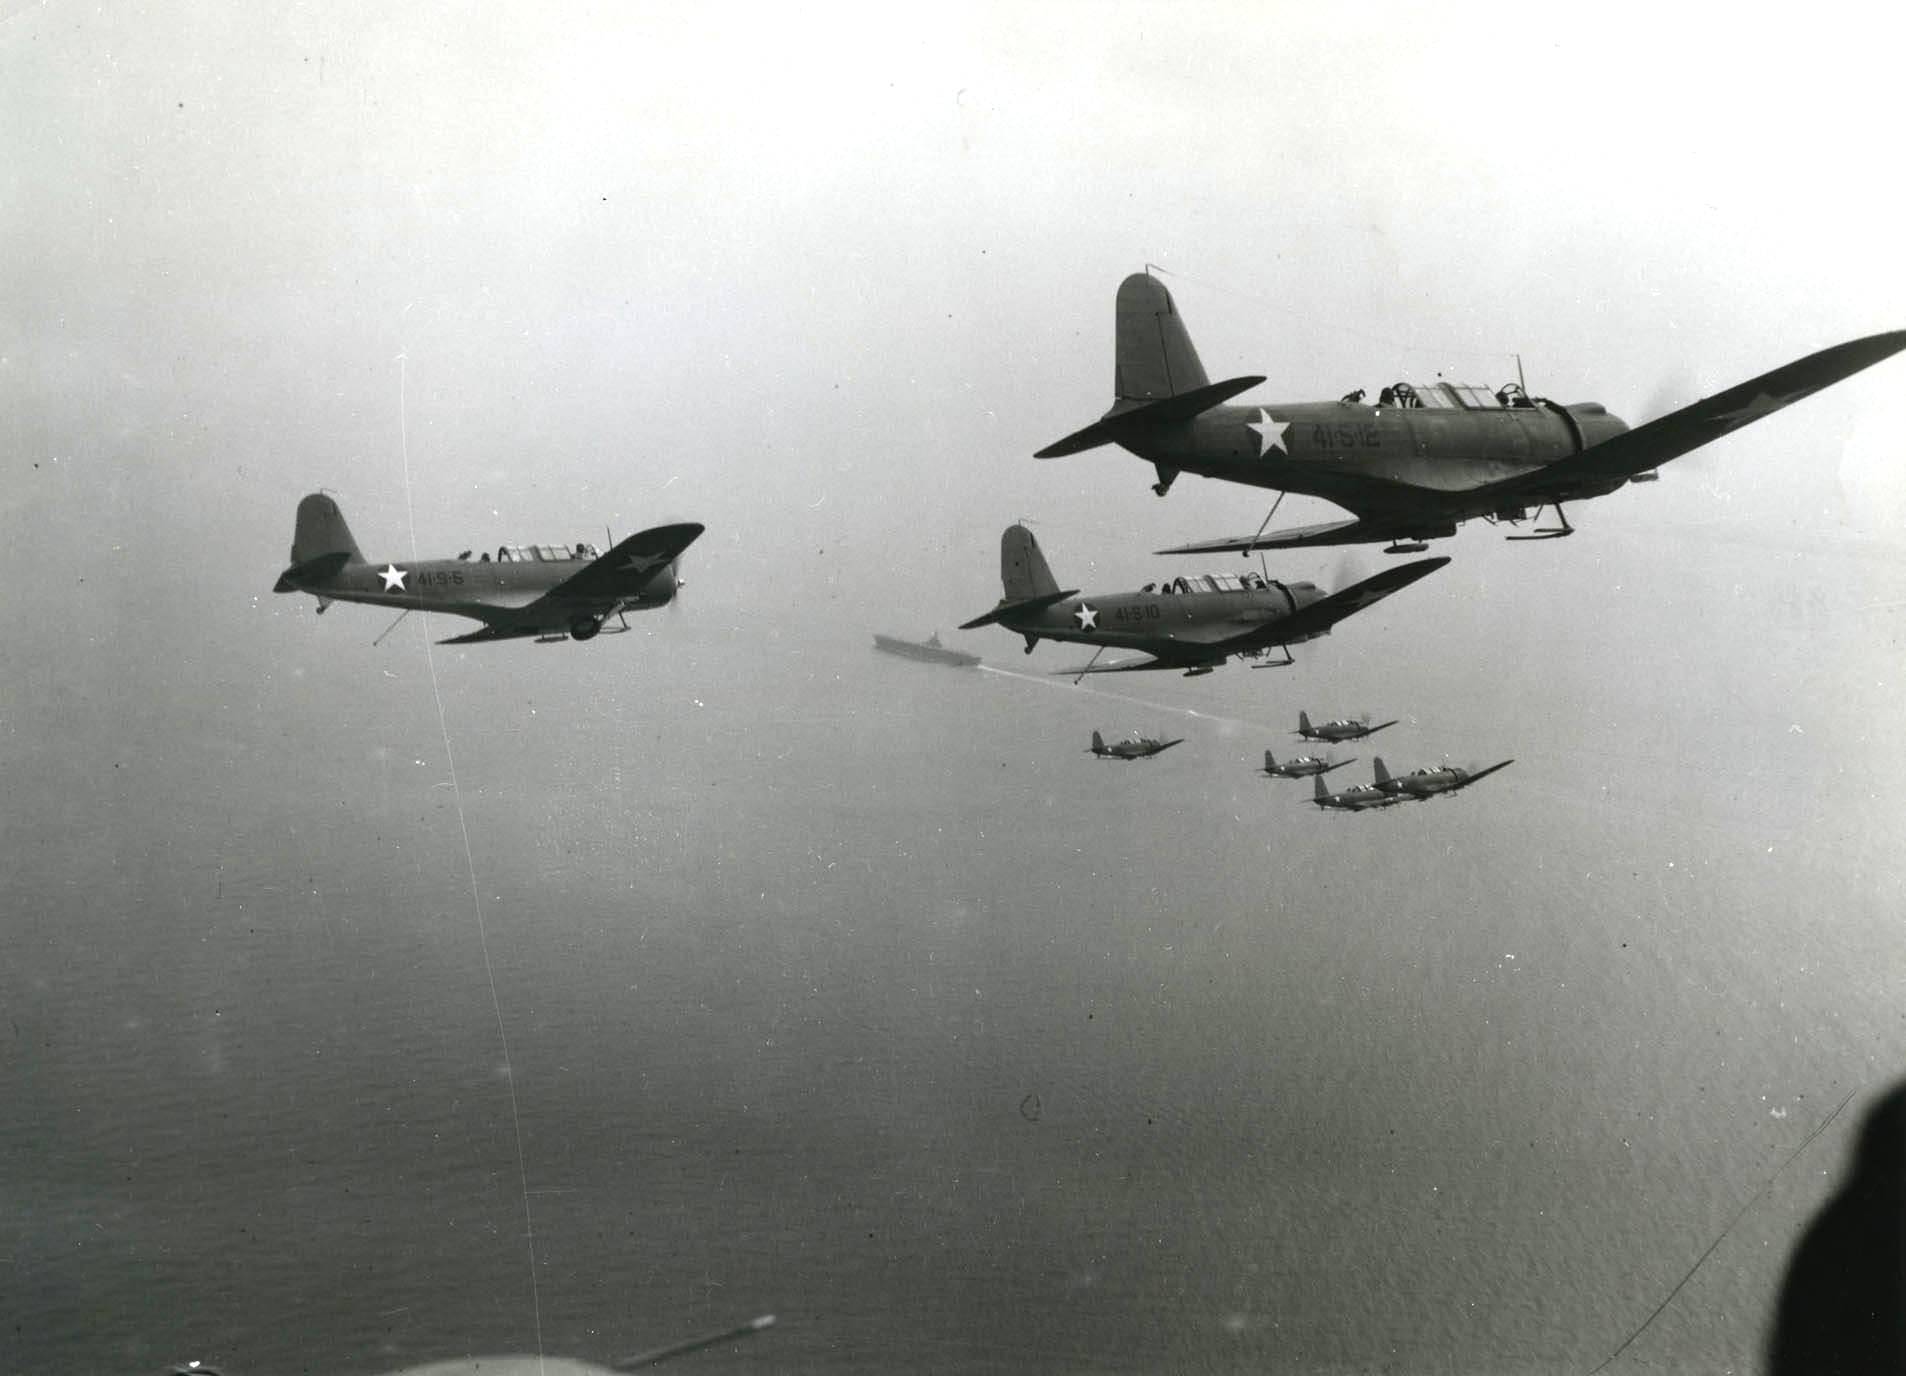 SB2U Vindicator dive bombers of Scouting Squadron VS-41 turning toward the carrier USS Ranger in the Lower Chesapeake Bay, United States, Sep 1942.